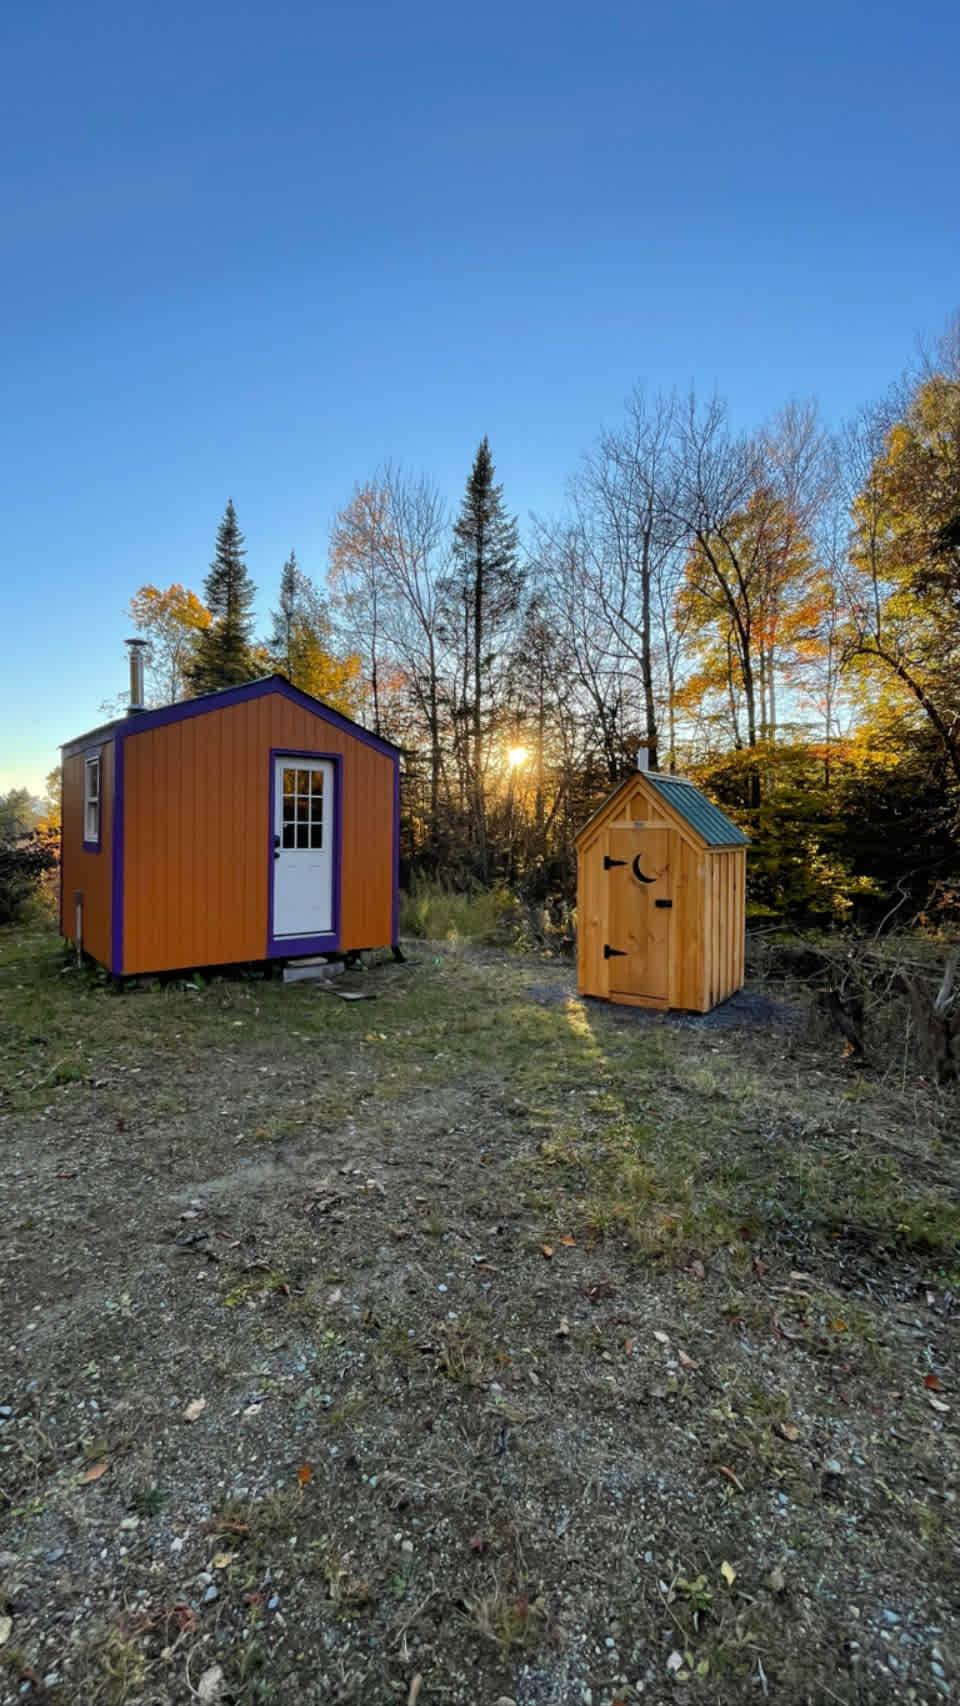 Shed has key pad access and pit toilet for use along with WI-FI and electricity. No running water but 5 gallons with manual pump provided. Water from natural spring up road near Dutch hill! 